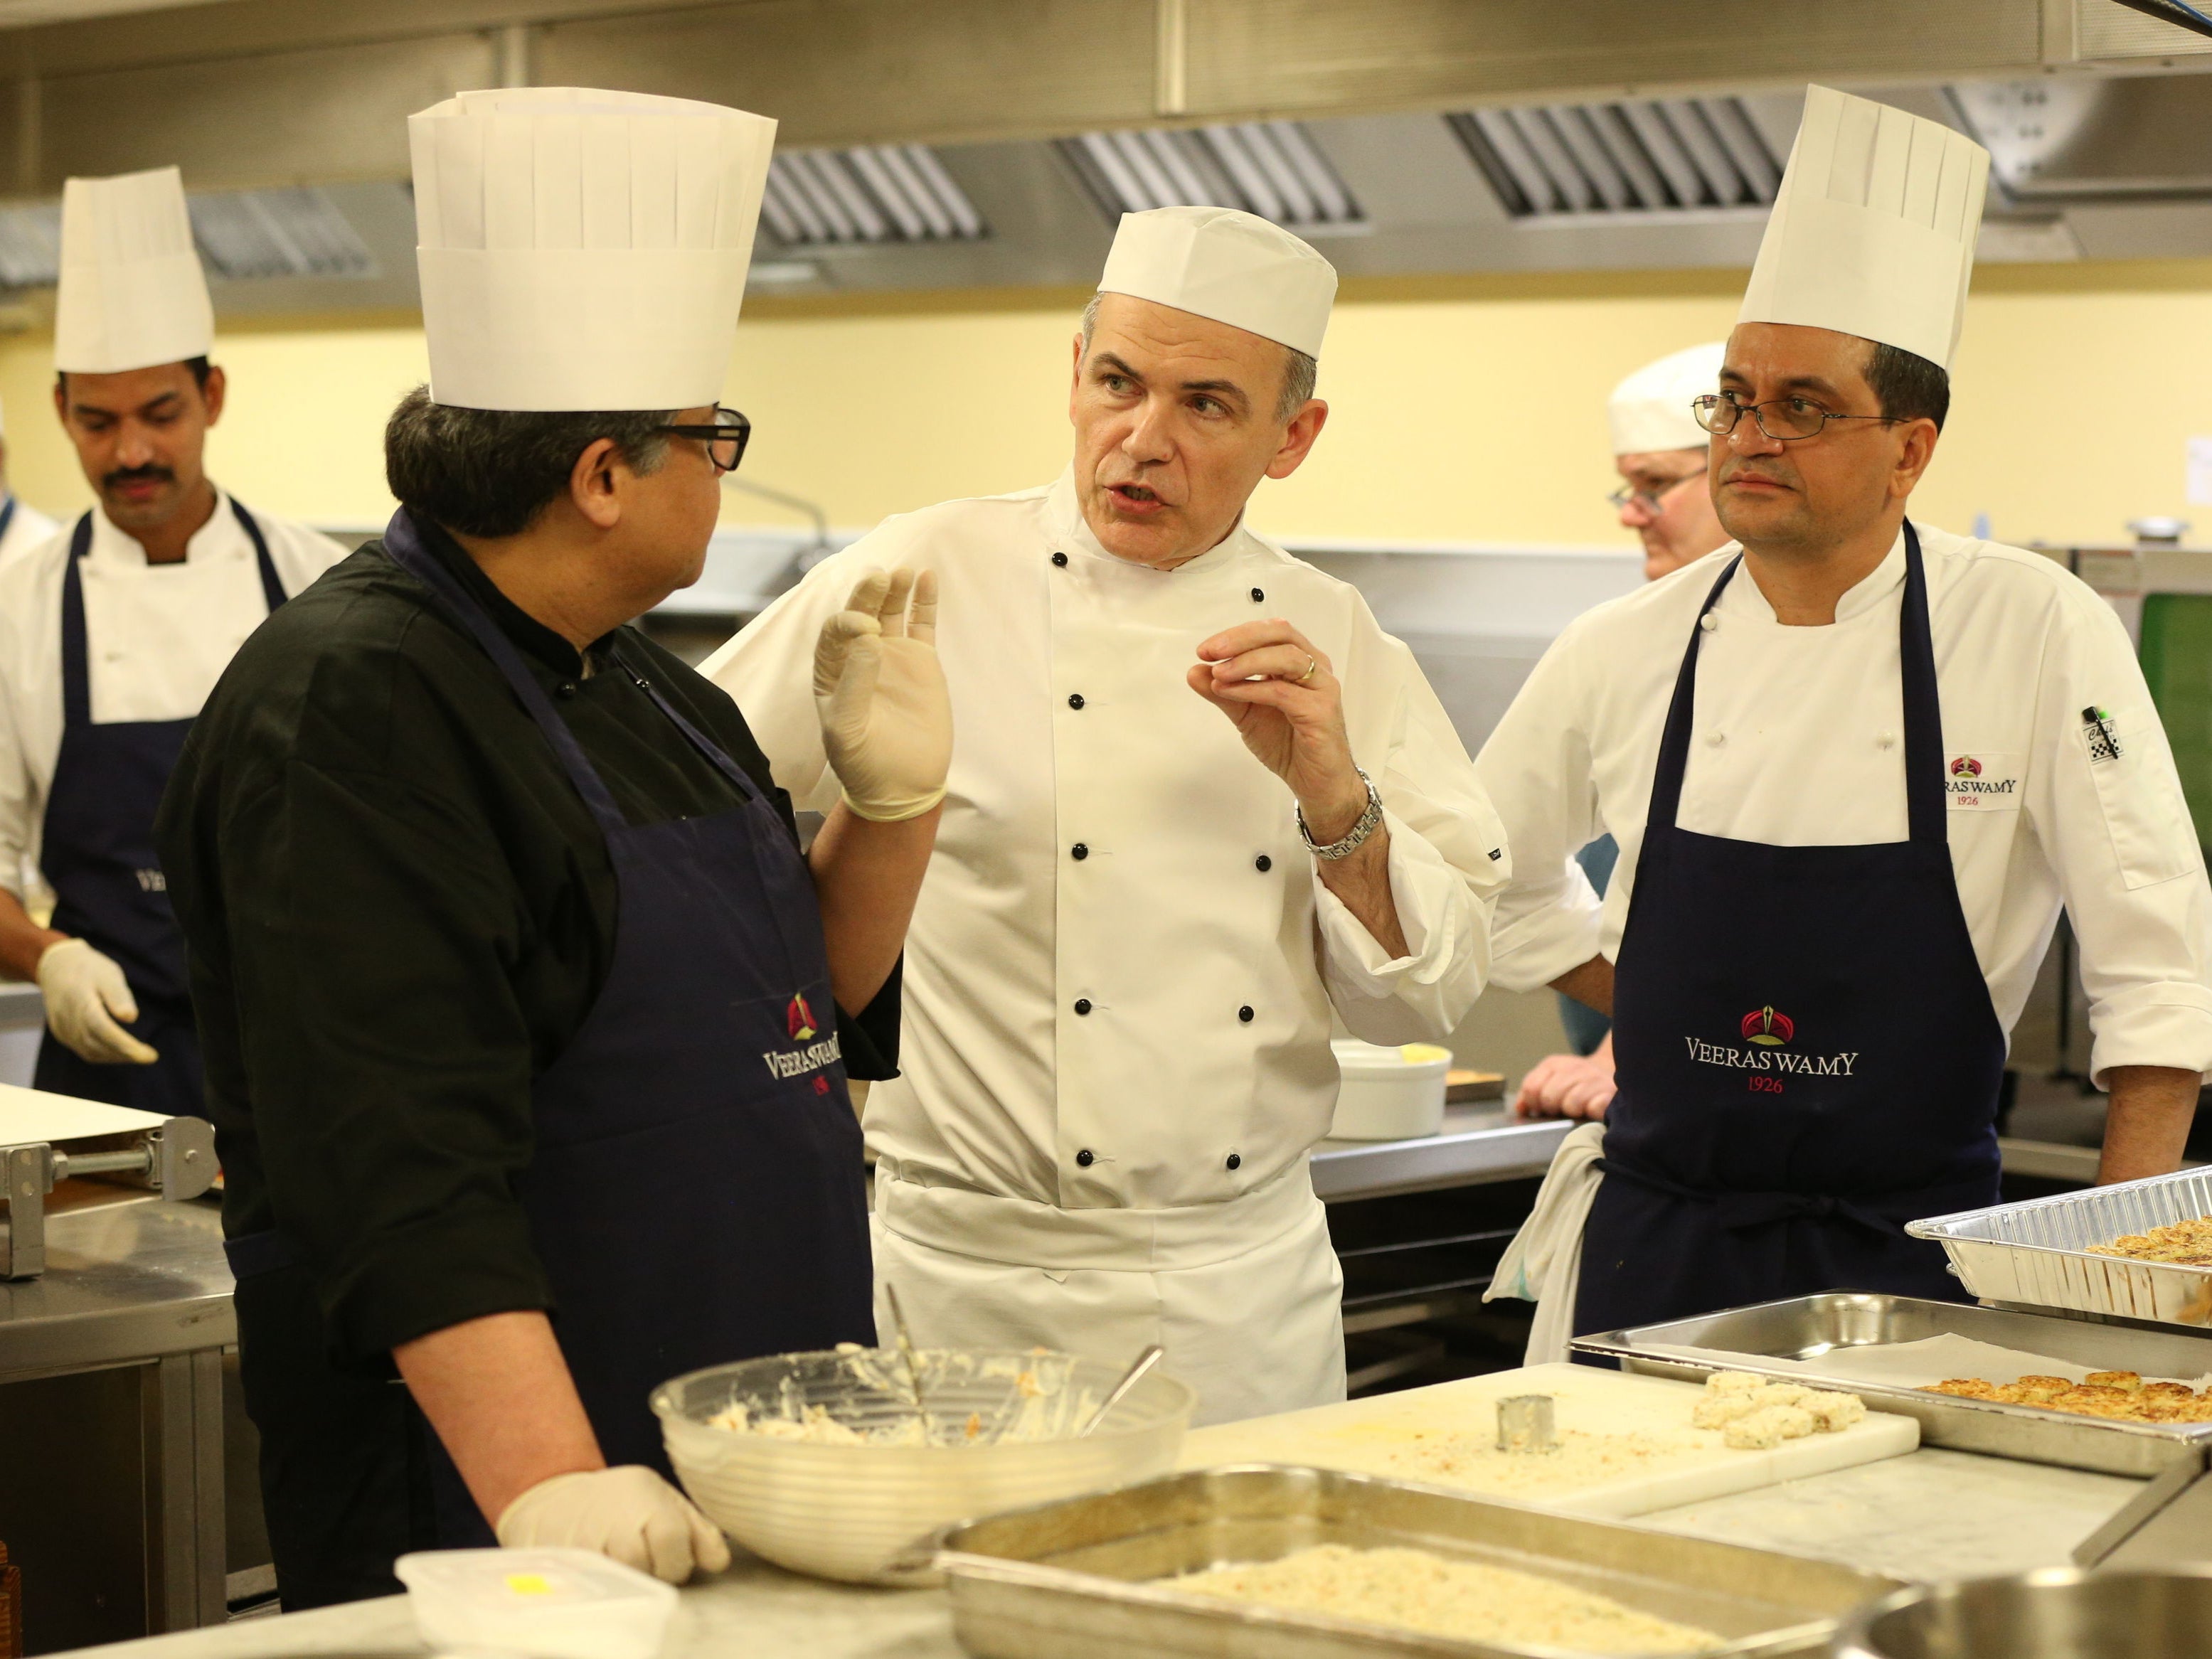 Head Chef Mark Flanagan (centre) and chef Uday Salumkhe (left) in the kitchen at Buckingham Palace as they prepare food for a reception to mark the launch of the UK-India Year of Culture 2017